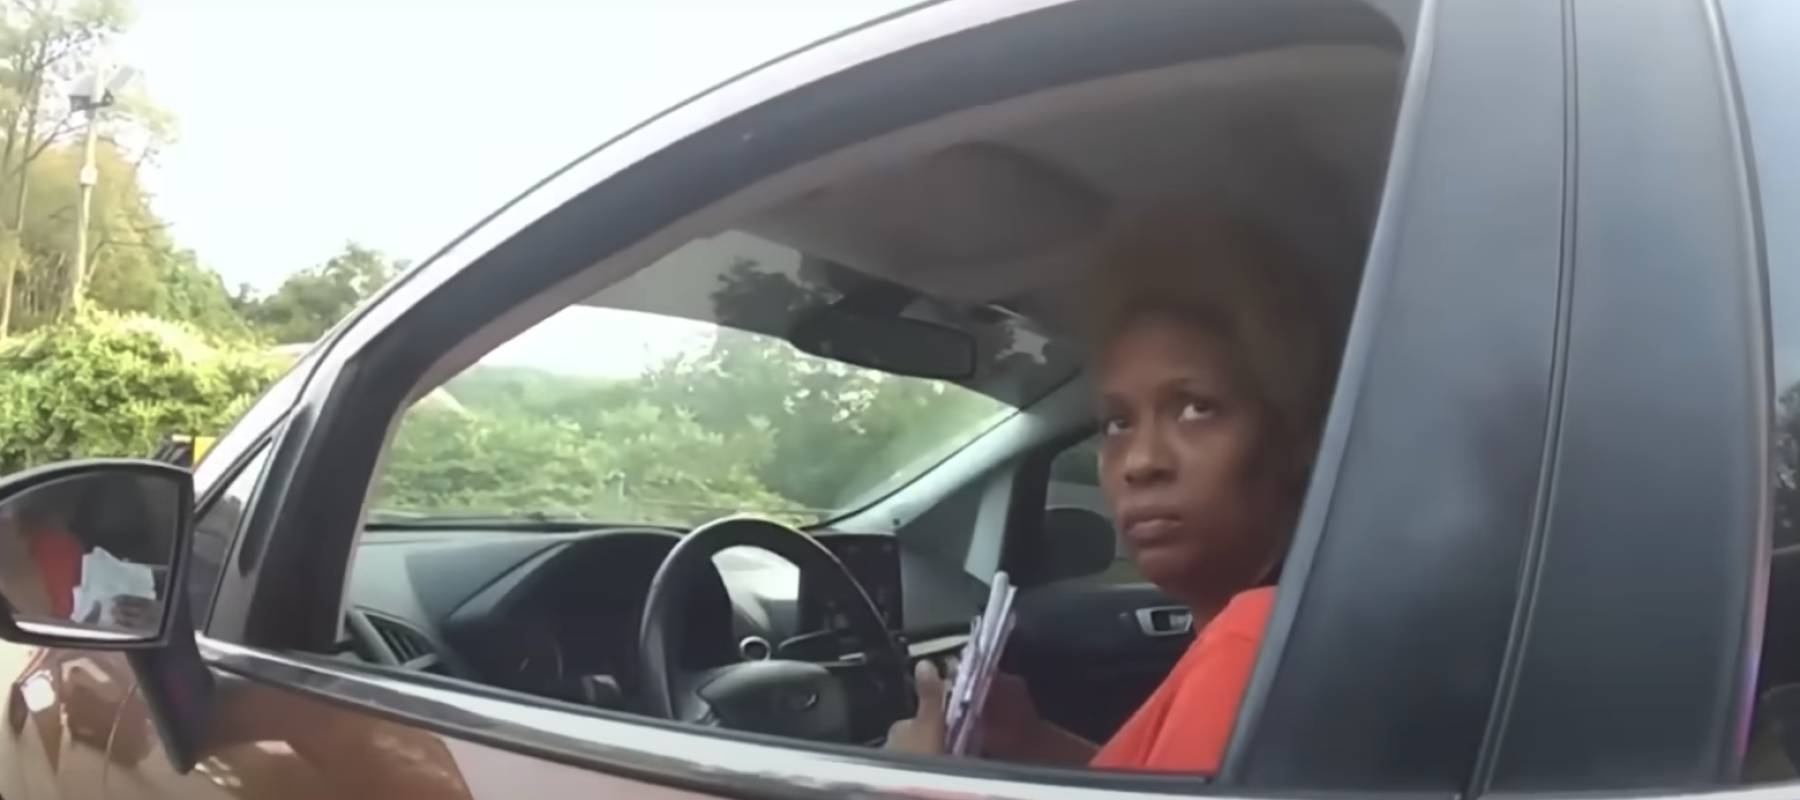 Woman seen from inside car, looking out with window rolled down.